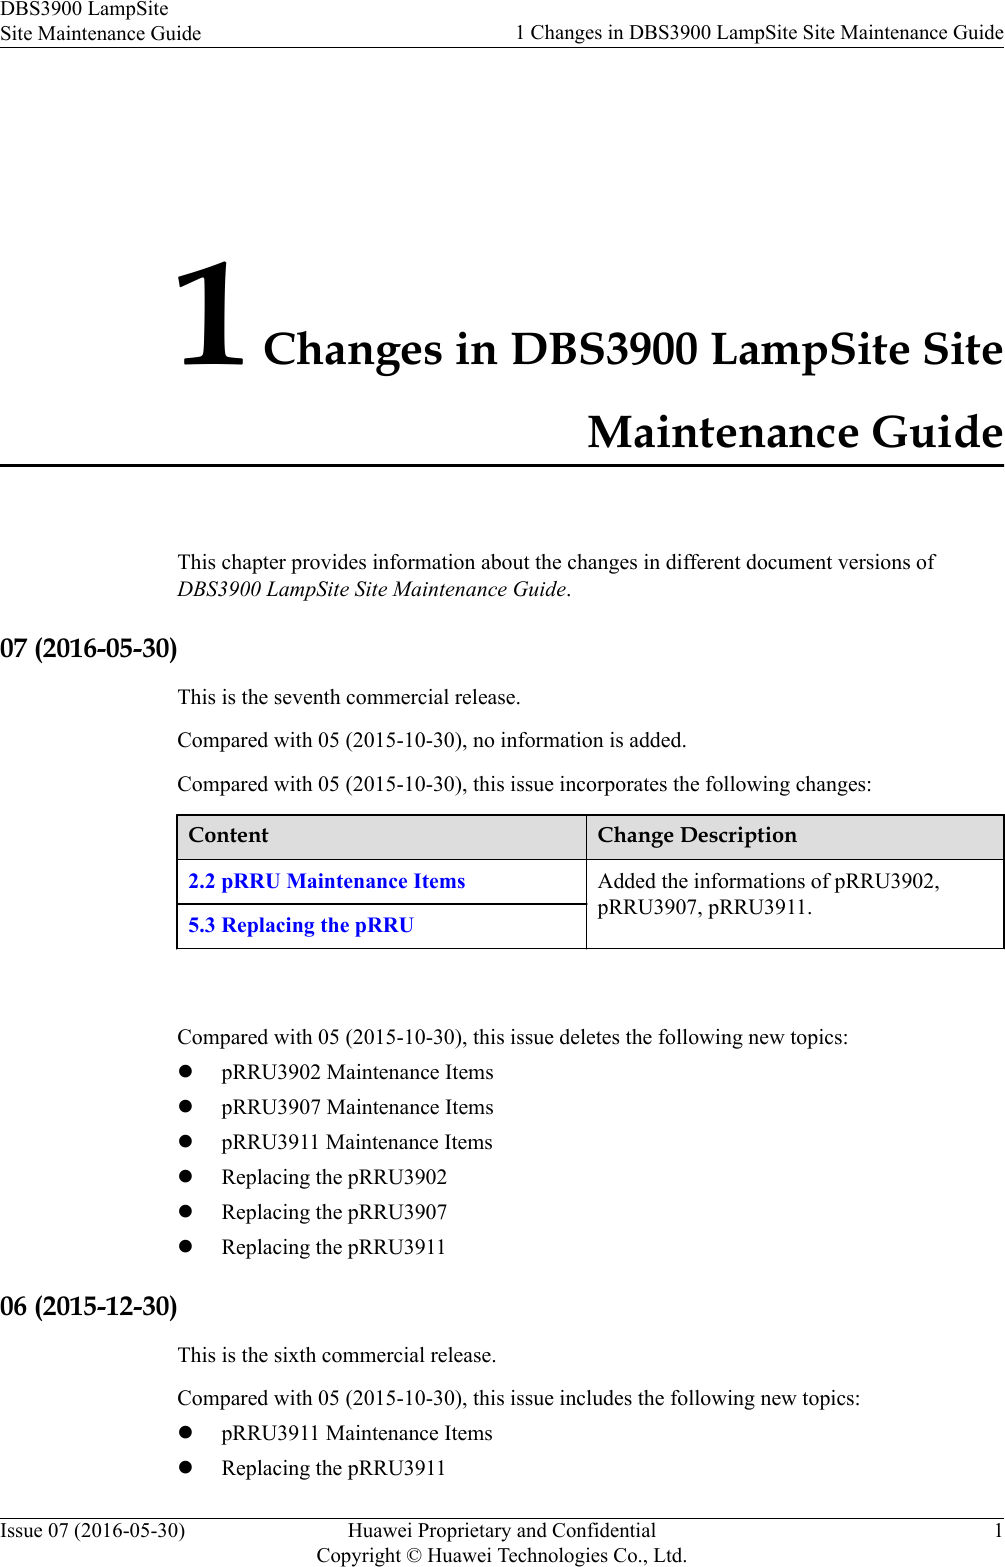 1 Changes in DBS3900 LampSite SiteMaintenance GuideThis chapter provides information about the changes in different document versions ofDBS3900 LampSite Site Maintenance Guide.07 (2016-05-30)This is the seventh commercial release.Compared with 05 (2015-10-30), no information is added.Compared with 05 (2015-10-30), this issue incorporates the following changes:Content Change Description2.2 pRRU Maintenance Items Added the informations of pRRU3902,pRRU3907, pRRU3911.5.3 Replacing the pRRU Compared with 05 (2015-10-30), this issue deletes the following new topics:lpRRU3902 Maintenance ItemslpRRU3907 Maintenance ItemslpRRU3911 Maintenance ItemslReplacing the pRRU3902lReplacing the pRRU3907lReplacing the pRRU391106 (2015-12-30)This is the sixth commercial release.Compared with 05 (2015-10-30), this issue includes the following new topics:lpRRU3911 Maintenance ItemslReplacing the pRRU3911DBS3900 LampSiteSite Maintenance Guide 1 Changes in DBS3900 LampSite Site Maintenance GuideIssue 07 (2016-05-30) Huawei Proprietary and ConfidentialCopyright © Huawei Technologies Co., Ltd.1